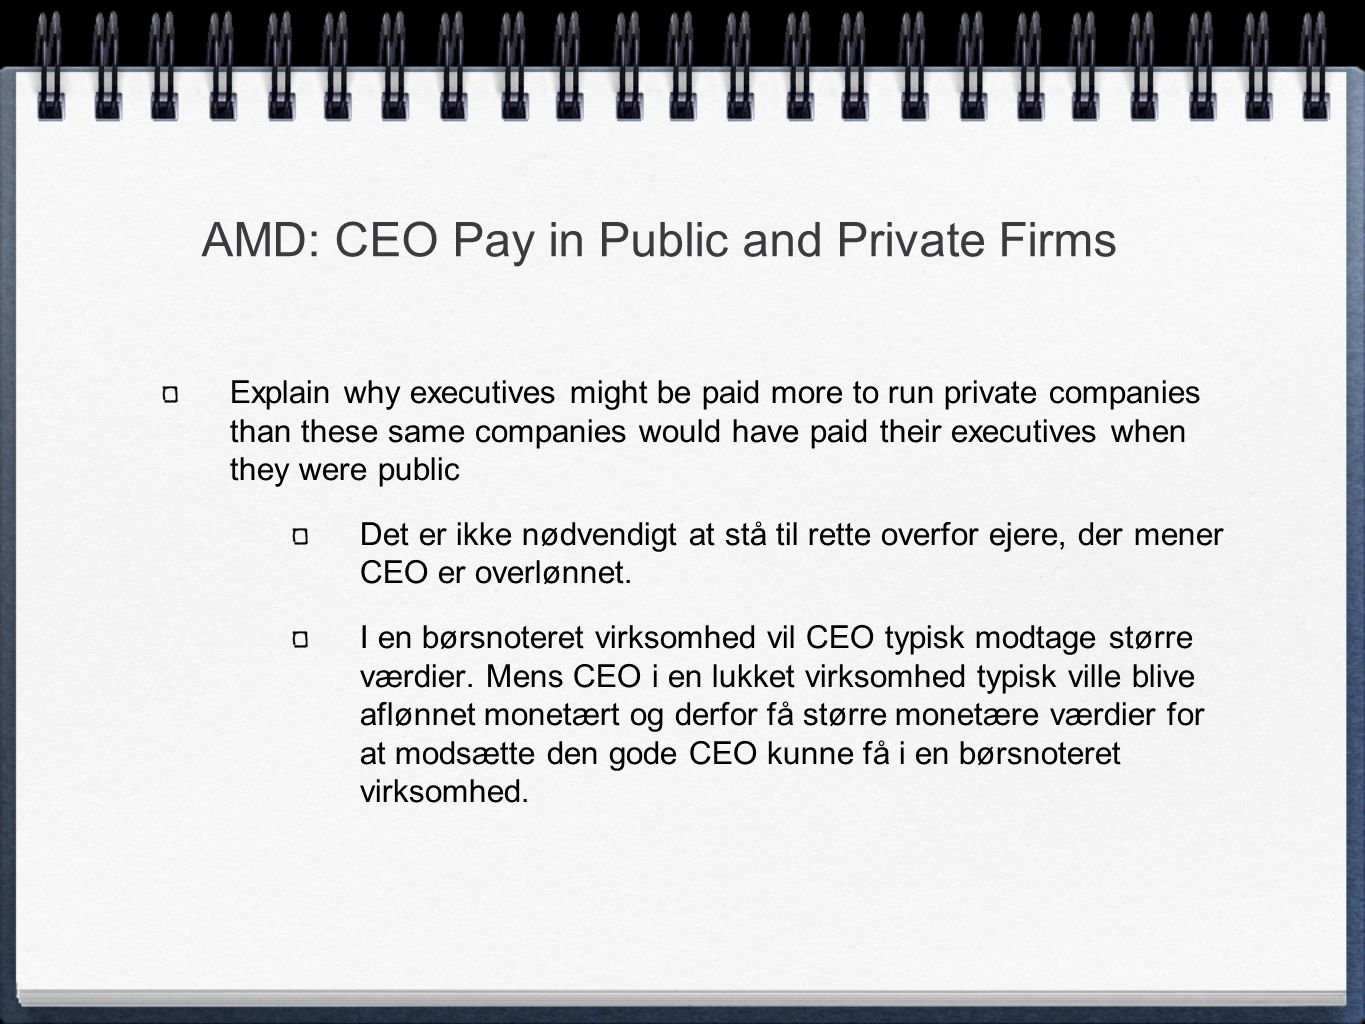 AMD: CEO Pay in Public and Private Firms Explain why executives might be paid more to run private companies than these same companies would have paid their executives when they were public Det er ikke nødvendigt at stå til rette overfor ejere, der mener CEO er overlønnet.